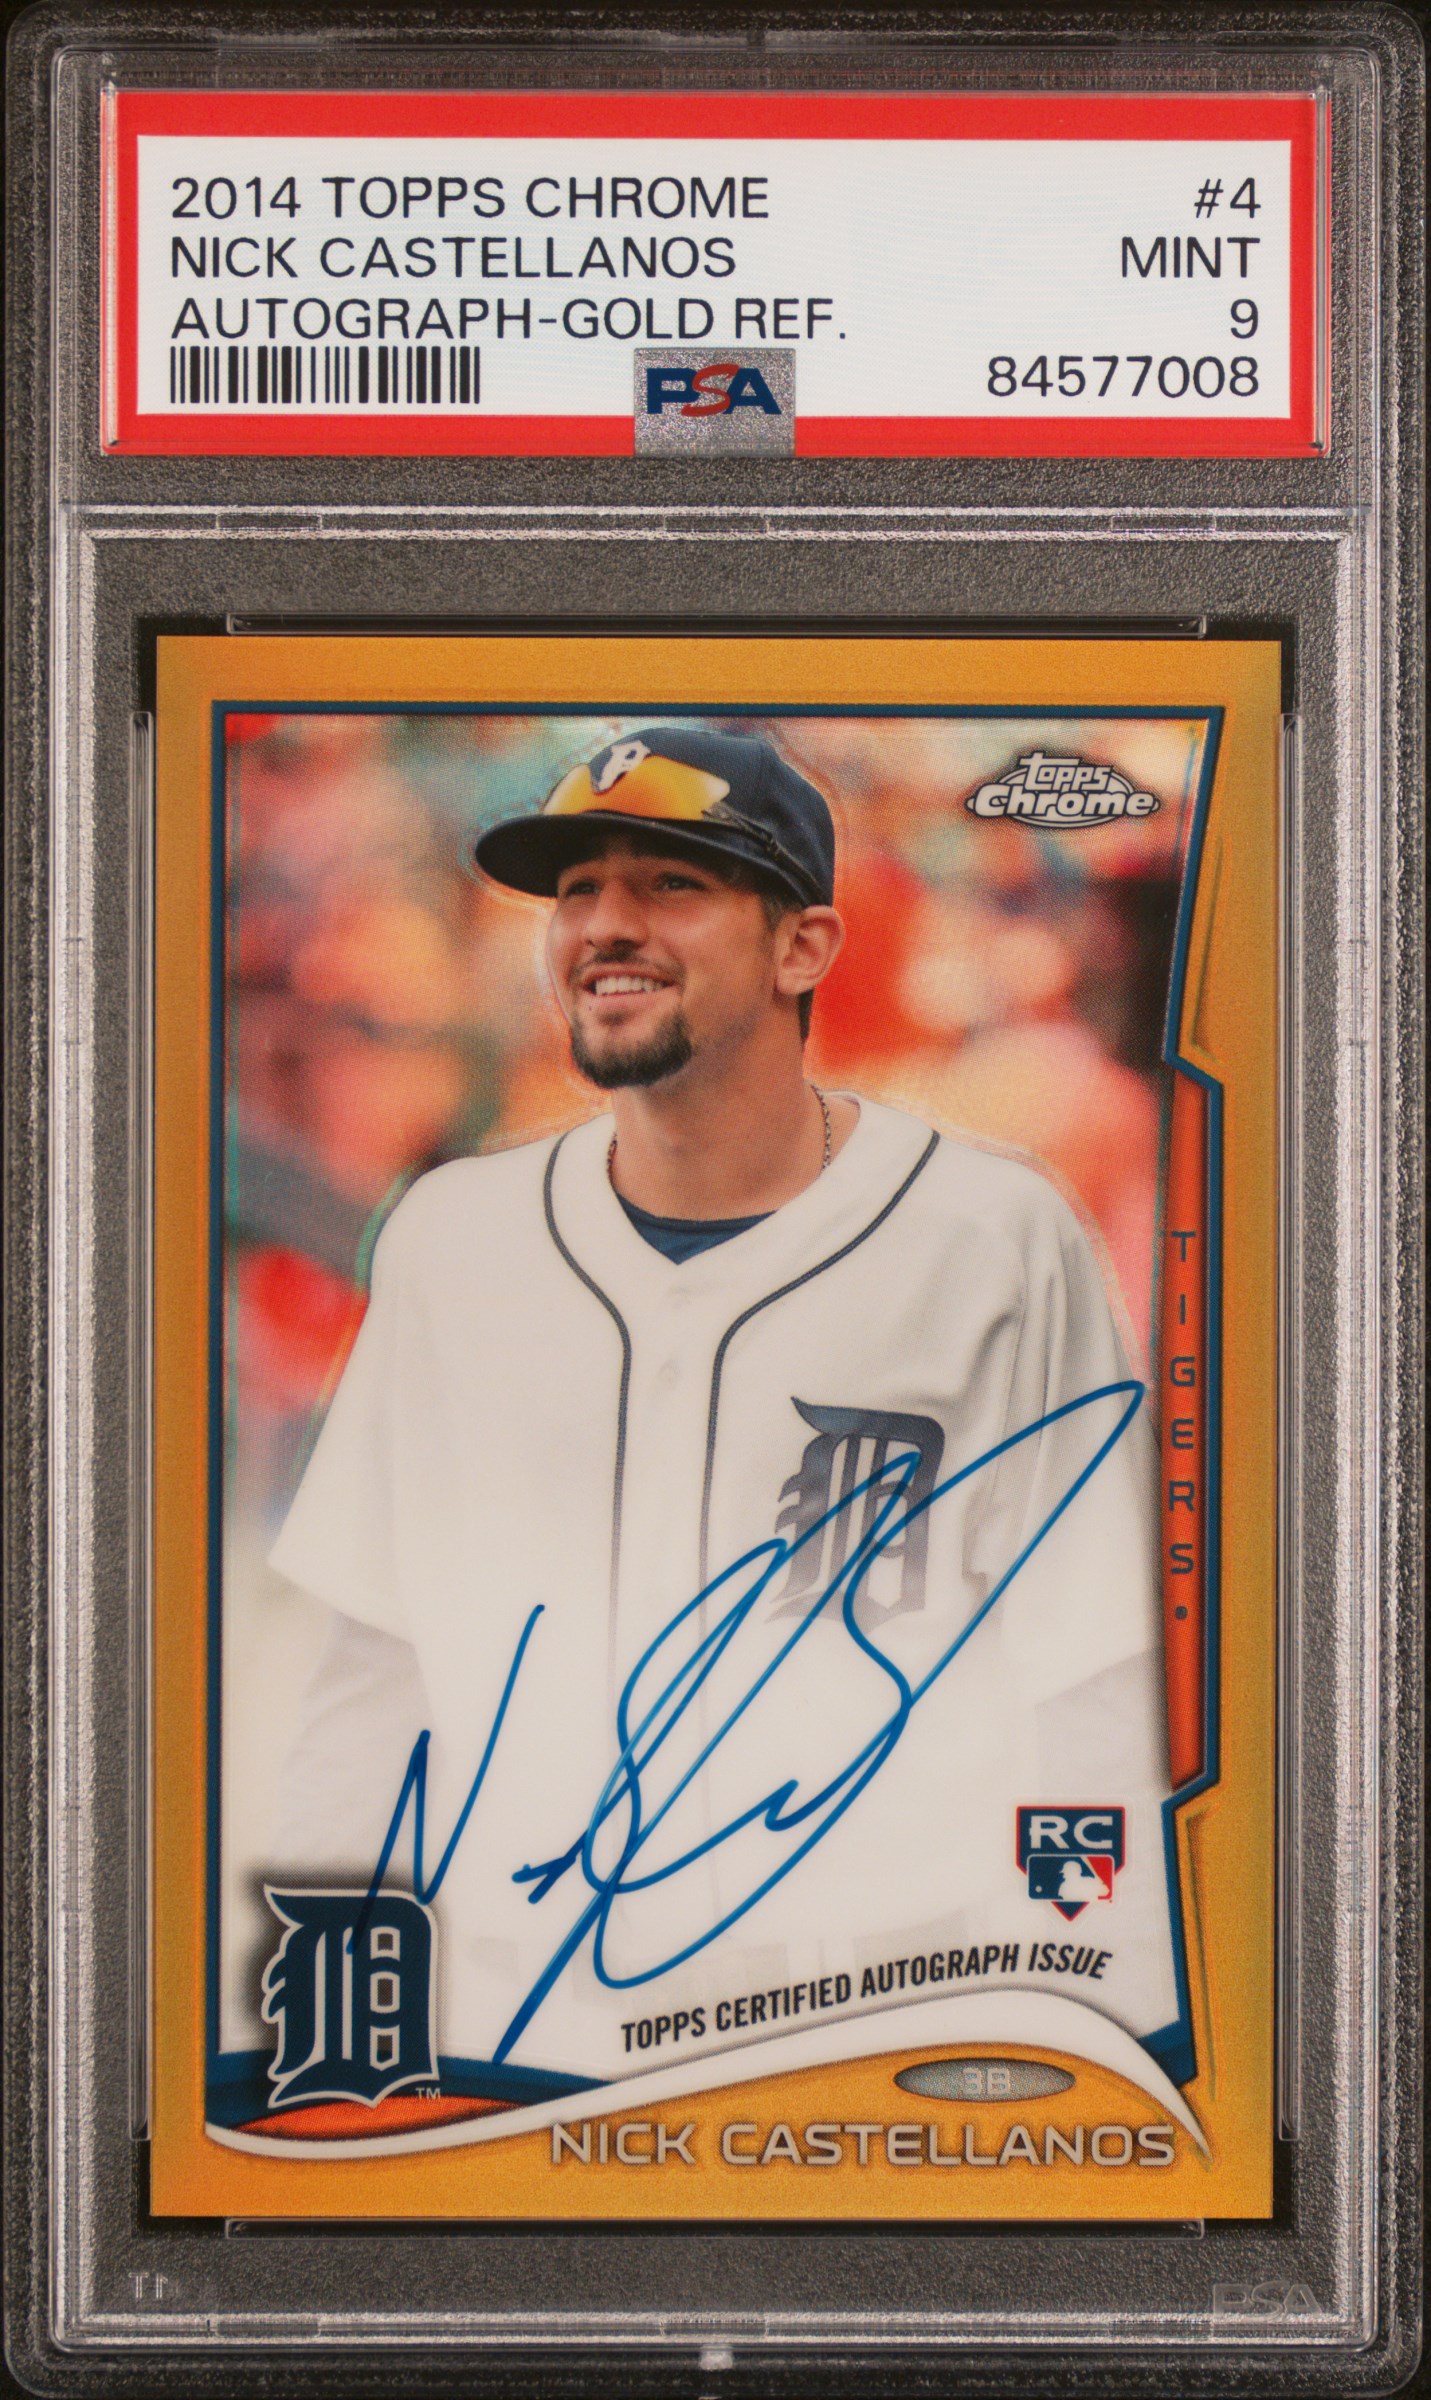 2014 Topps Chrome Autograph-Gold Refractor #4 Nick Castellanos Signed Rookie CArd (#30/50) – PSA MINT 9